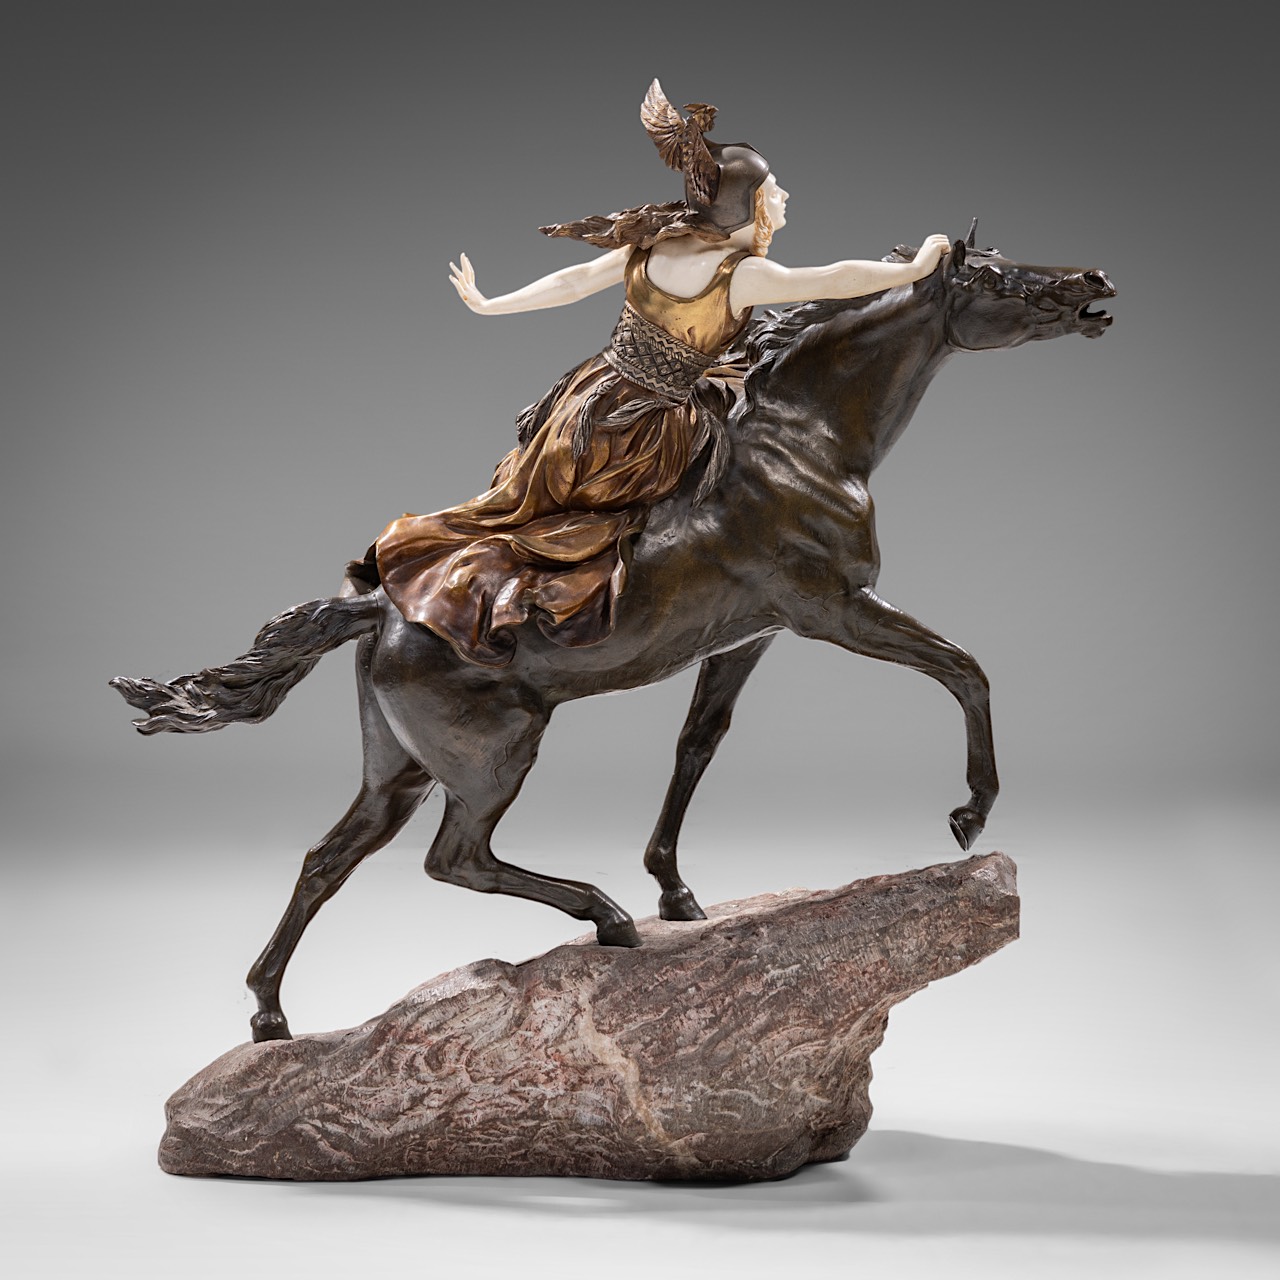 Claire Jeanne Roberte Colinet (1880-1950), 'Valkiria - Towards the Unknown', chryselephantine sculpt - Image 5 of 14